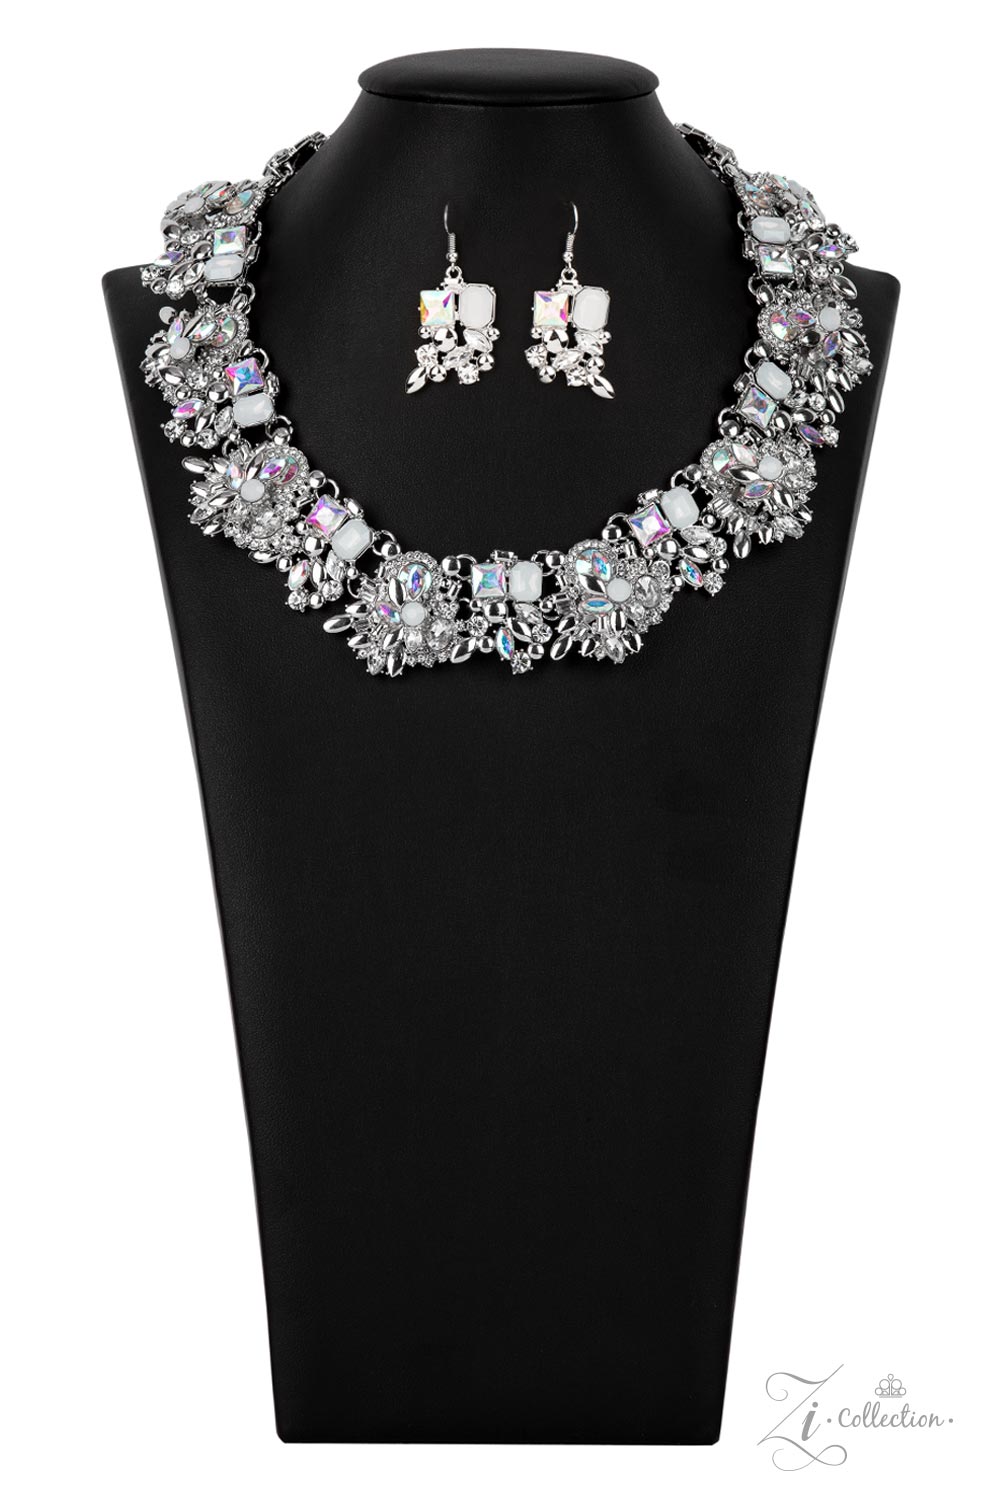 Exceptional 2021 Zi Collection Necklace - Paparazzi Accessories  An irresistible collection of iridescent, classic white, and milky white rhinestones intentionally coalesces and stacks into opulent silver accented frames. Varying in size and cuts, the mismatched rhinestone spangled frames regally link below the collar, adding dramatic dimension to this majestic knockout with a dash of stellar 3D sparkle. Features an adjustable clasp closure. Includes one pair of matching earrings.